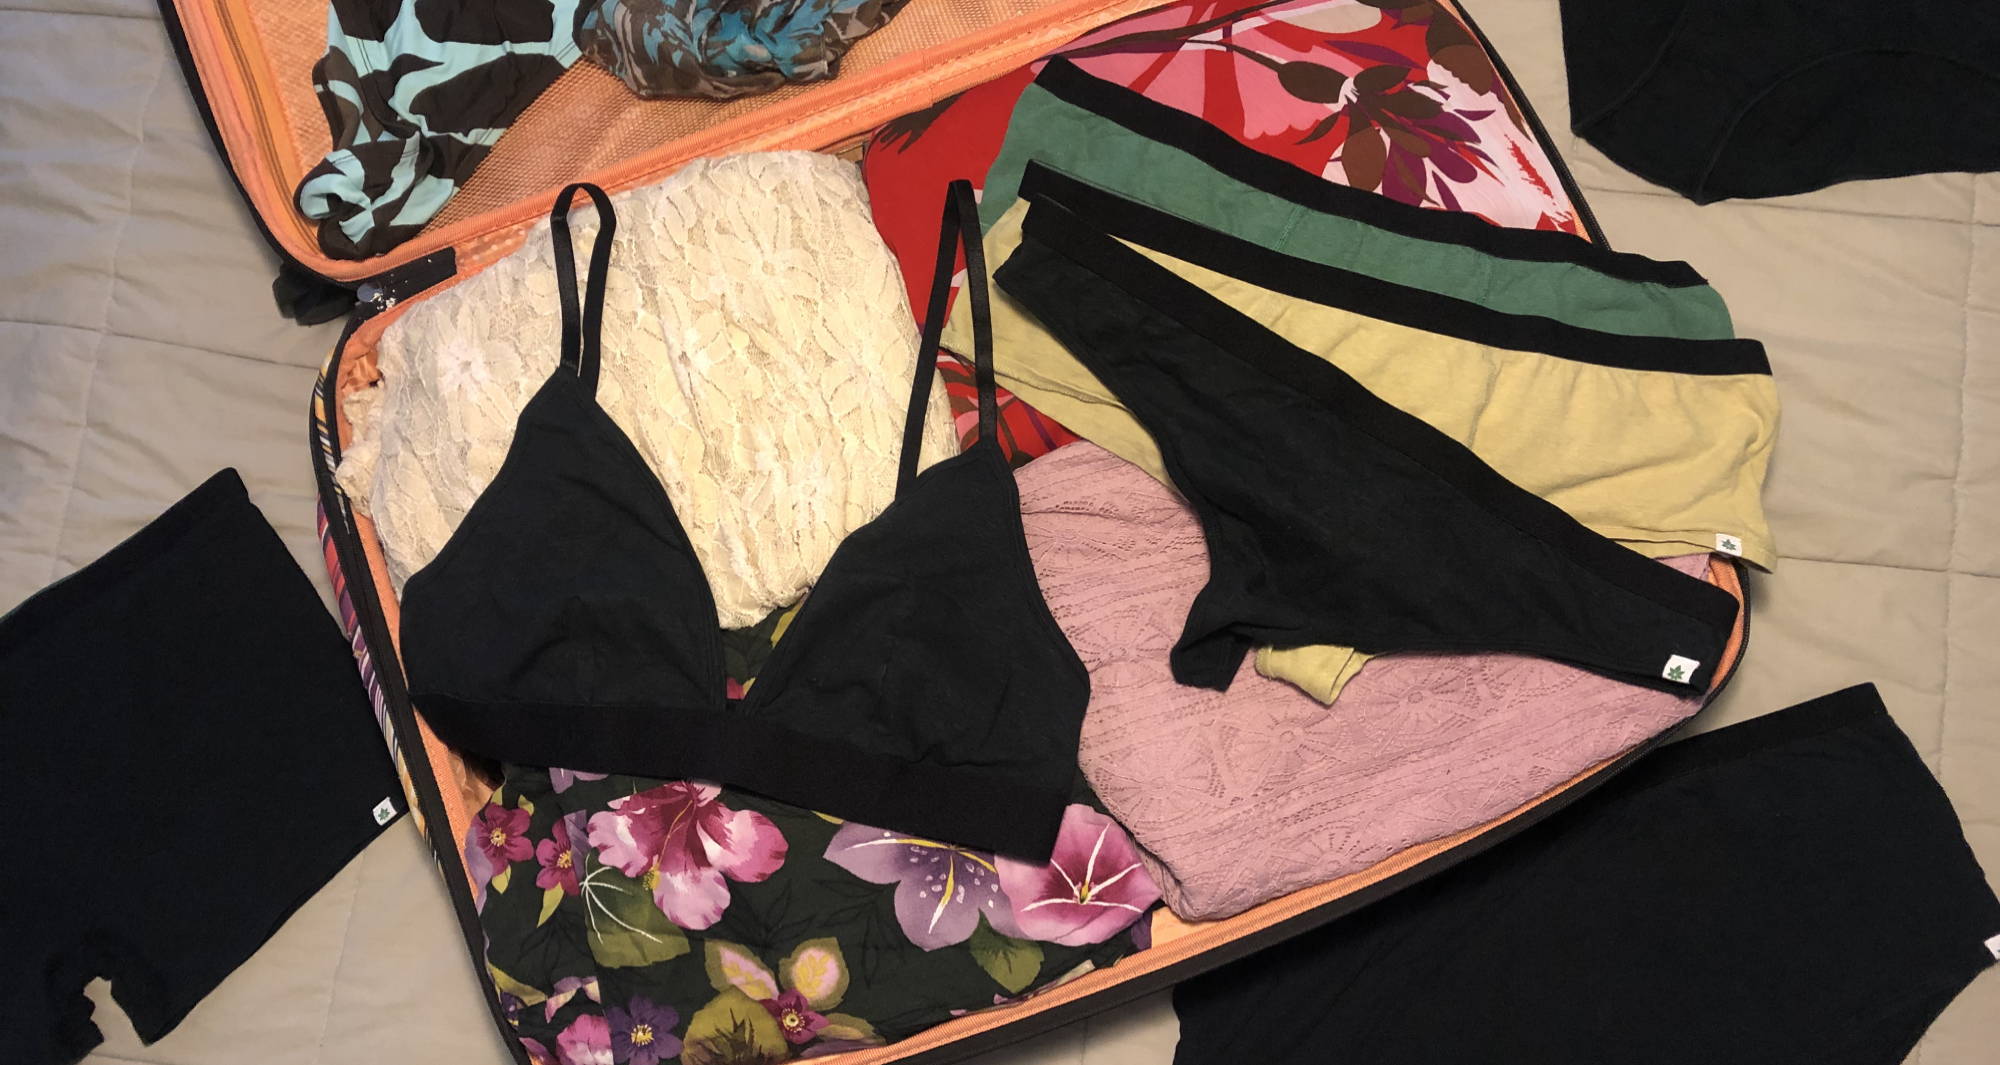 suitcase open on the ground with multicolor clothes folded inside and a black bra and thong underwear laying flat on top